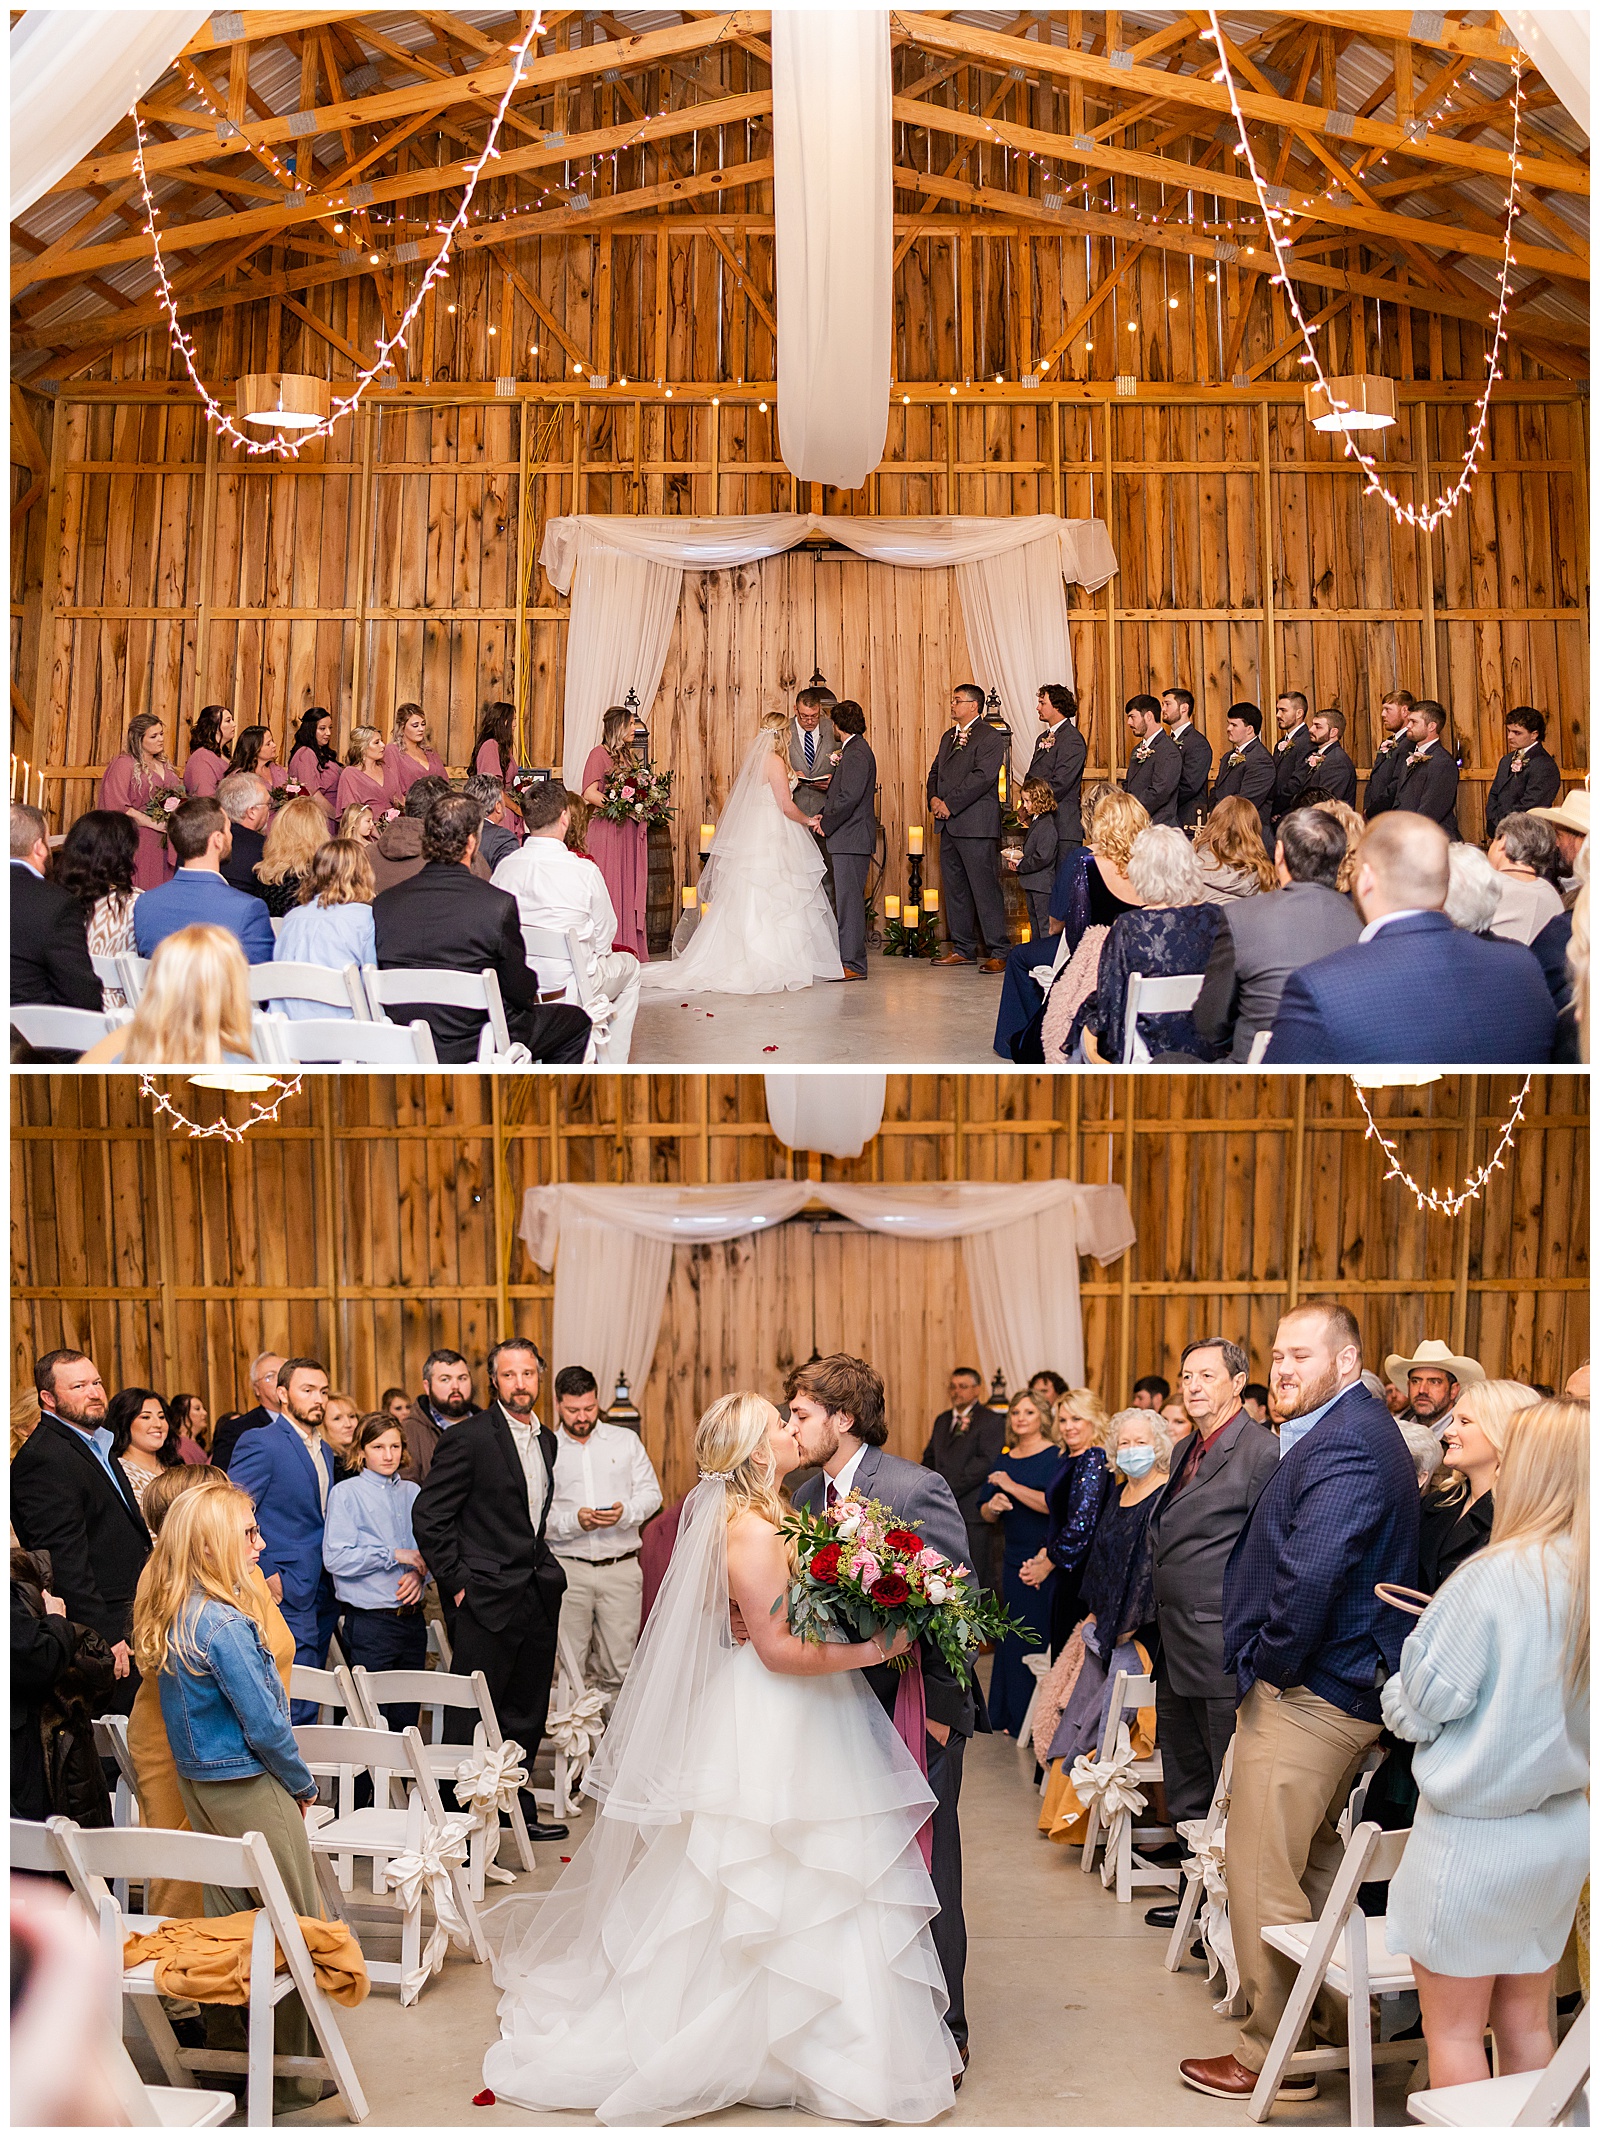 photographer captures the indoor ceremony at a rustic pine farms wedding